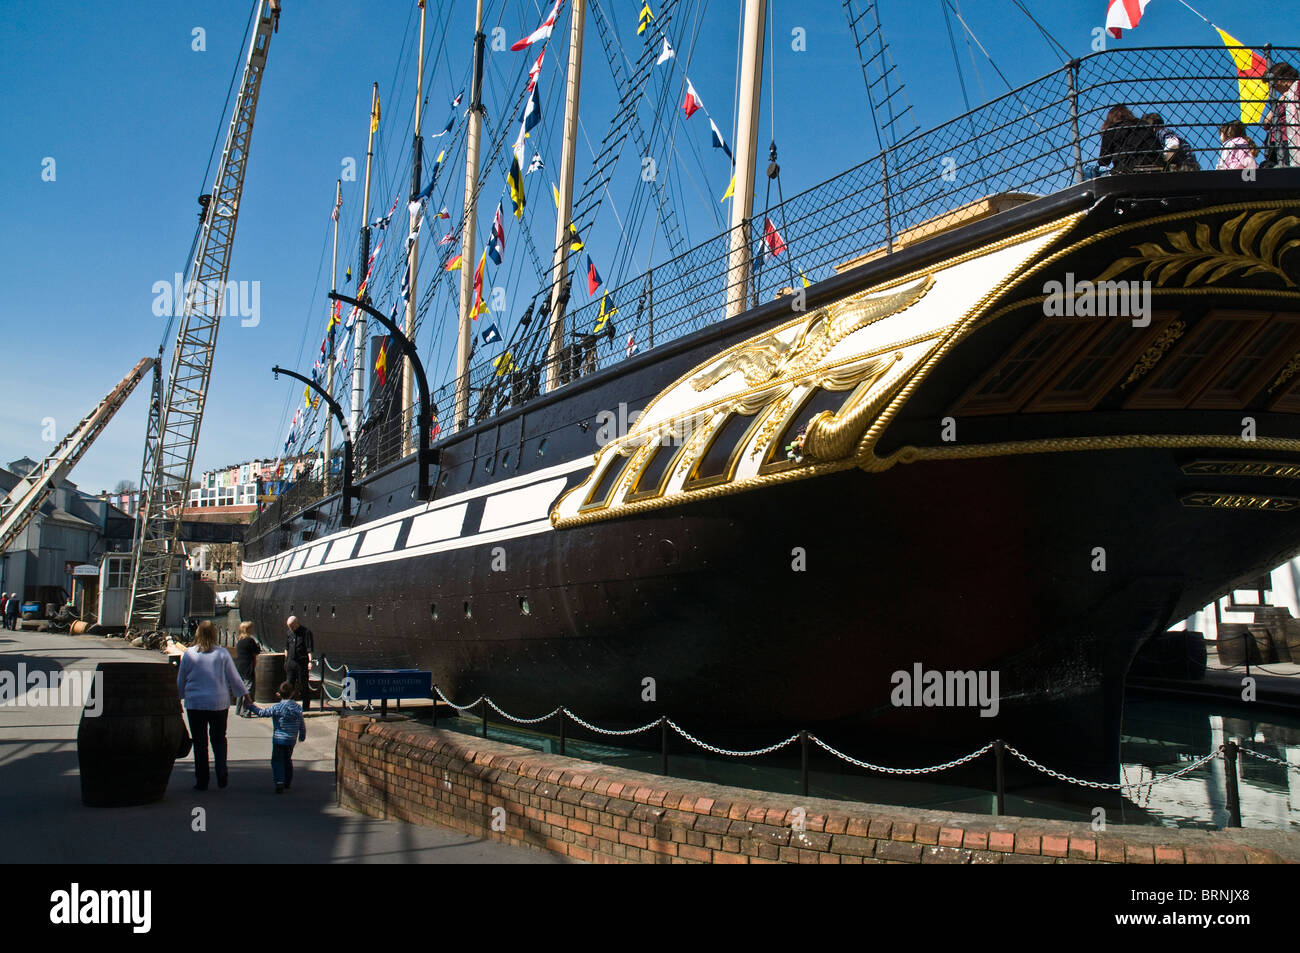 dh SS Great Britain BRISTOL DOCKS BRISTOL Brunels SS Great Britain museum dockside woman and child tourists steamship ship people uk Stock Photo